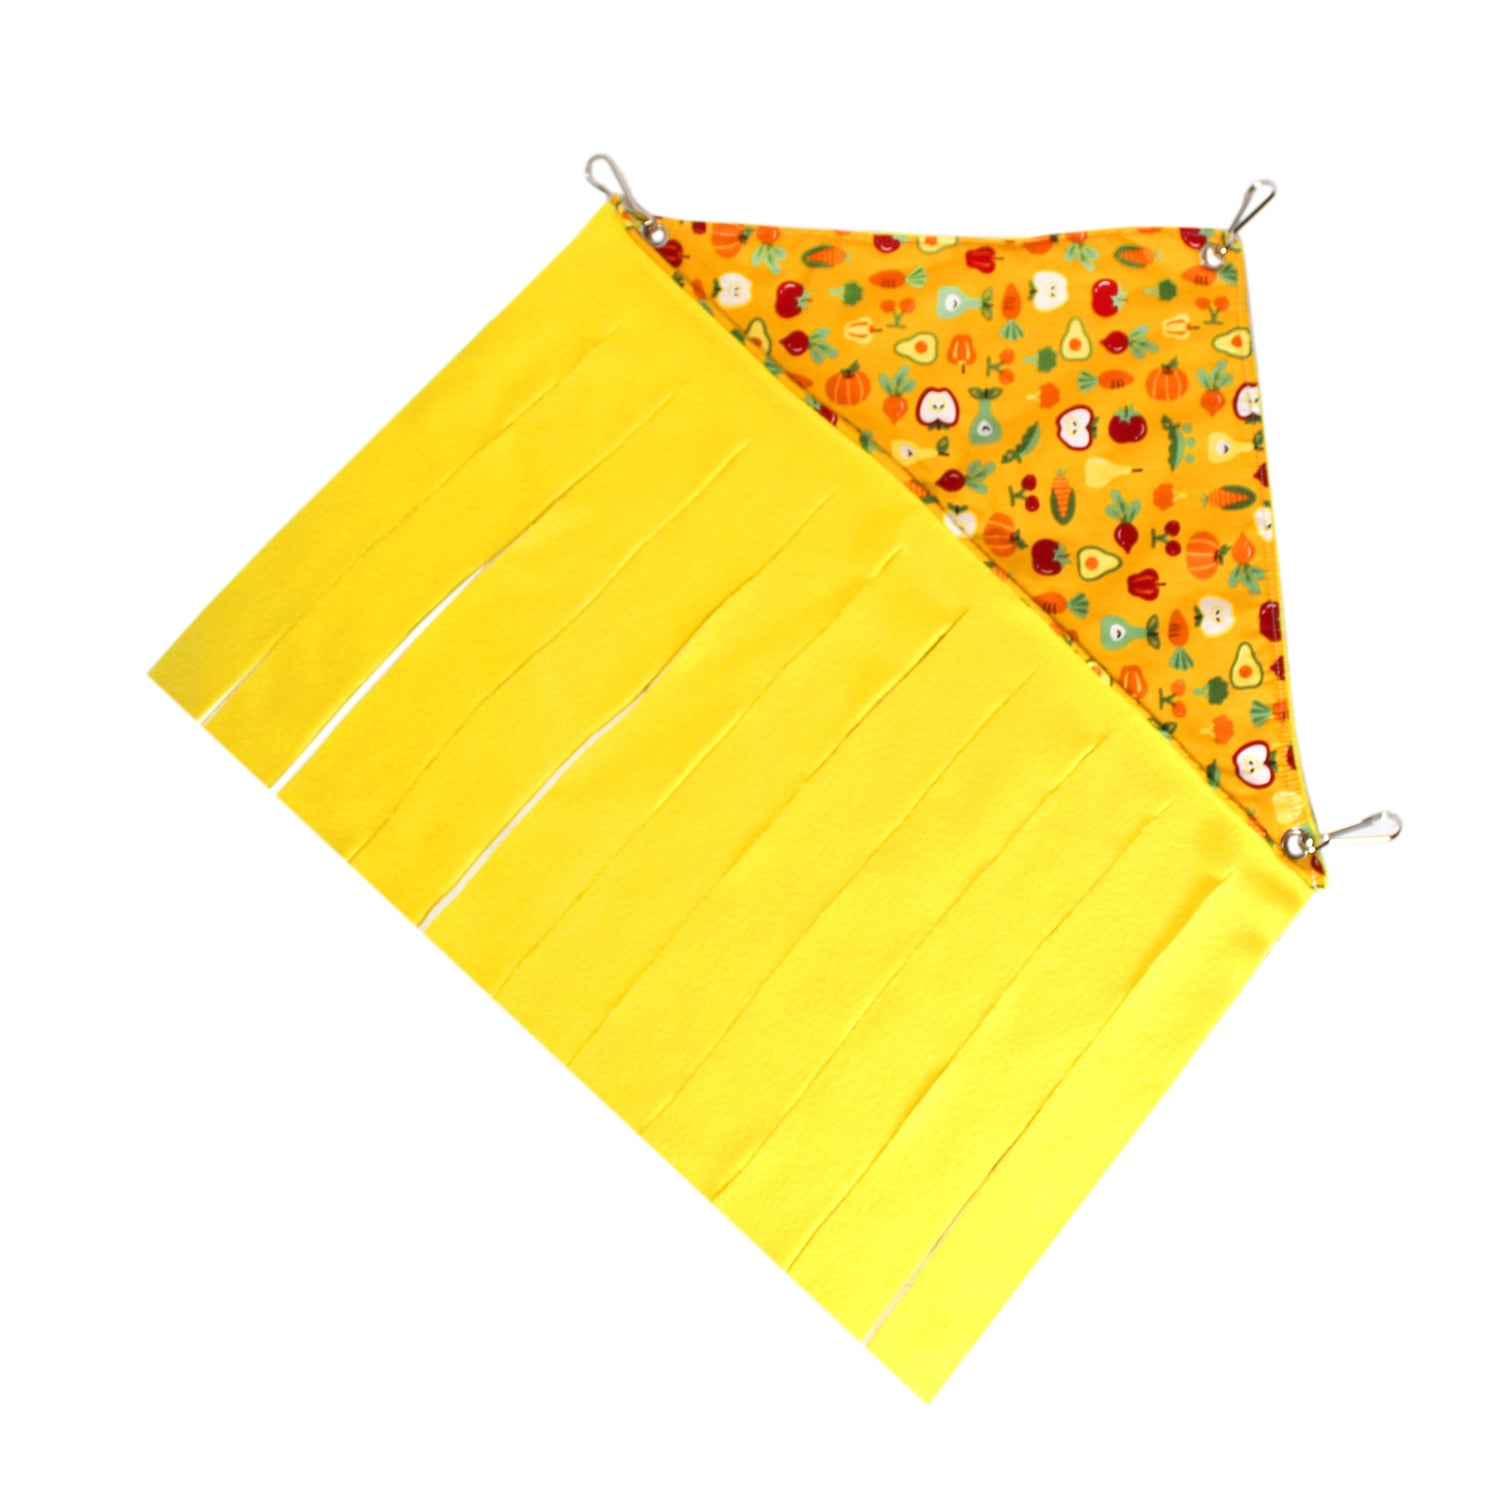 Yellow corner fleece forest with anti pill fleece and vegetable pattern cotton. Also 3 metal clips for hanging.